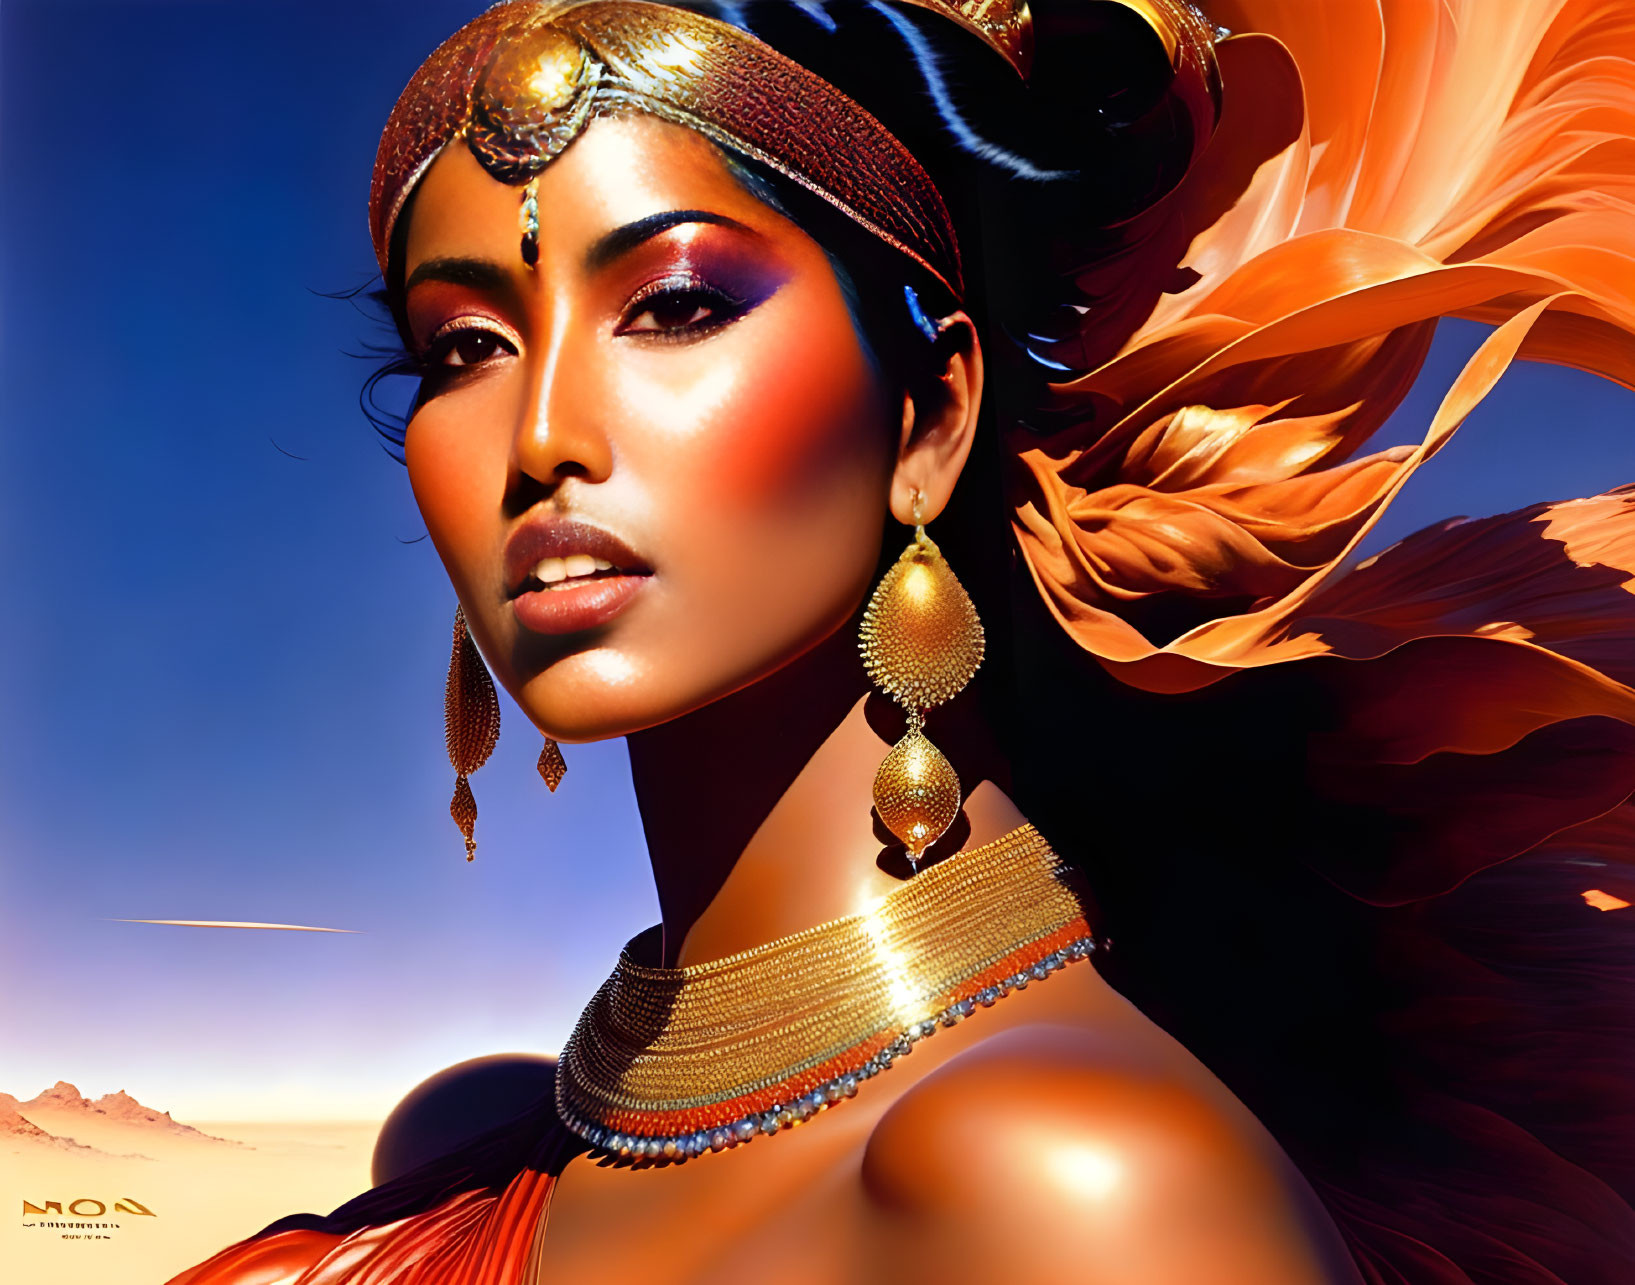 Digital artwork of woman with golden jewelry, headpiece, and fiery orange scarf in desert sunset.